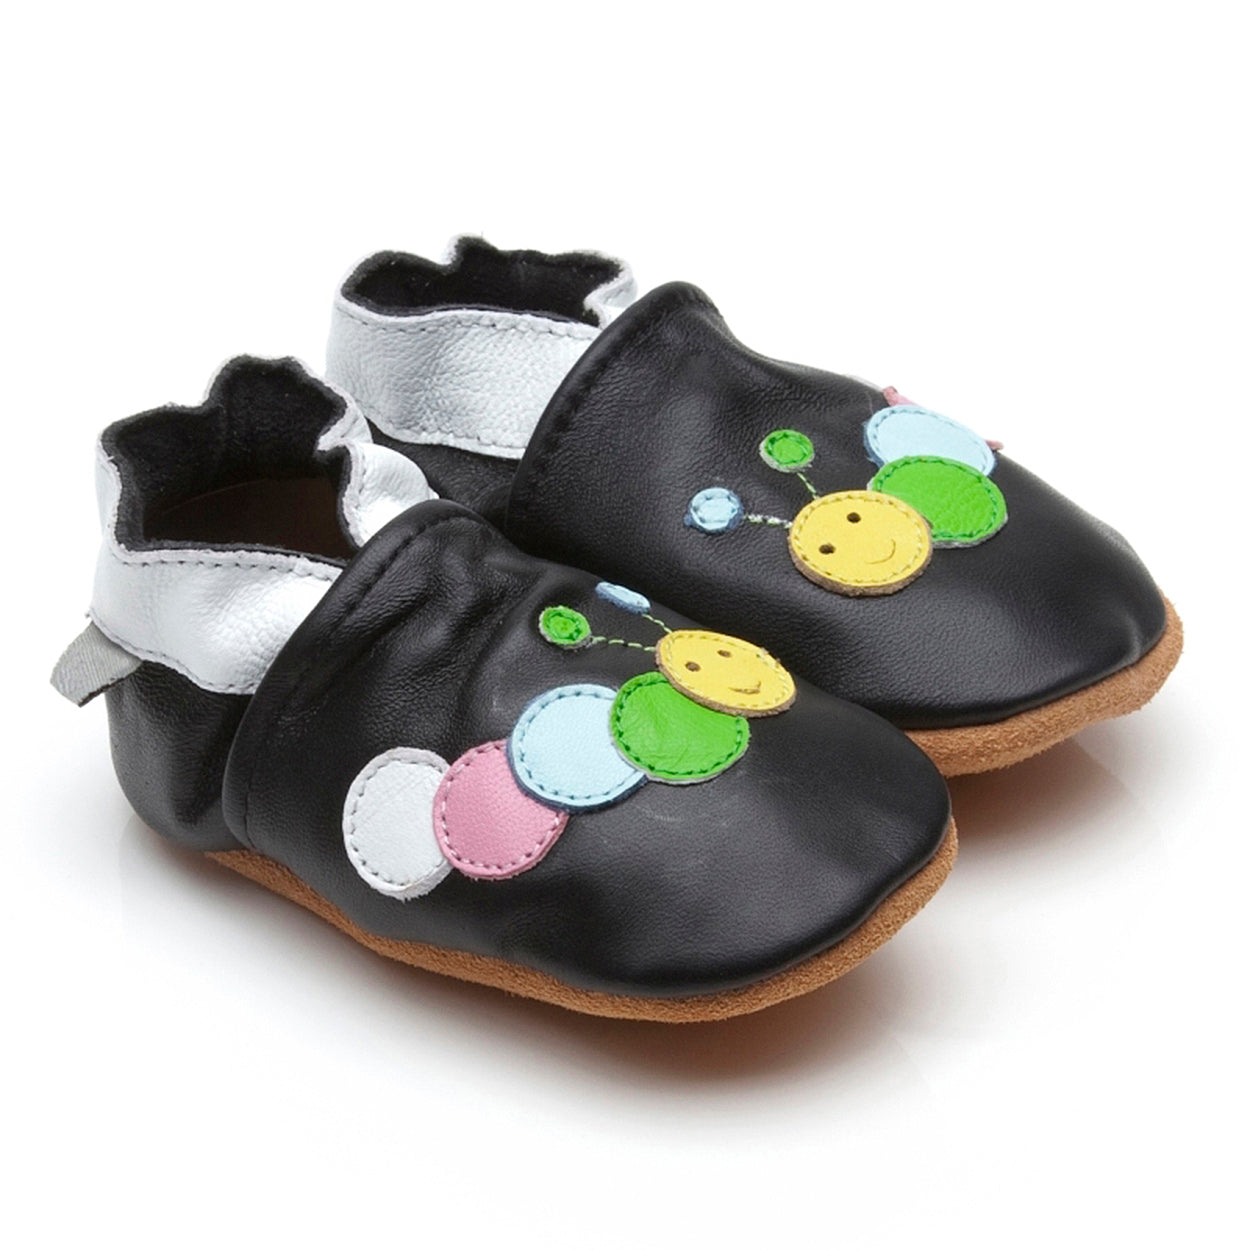 Soft Leather Baby Shoes Caterpillar Black